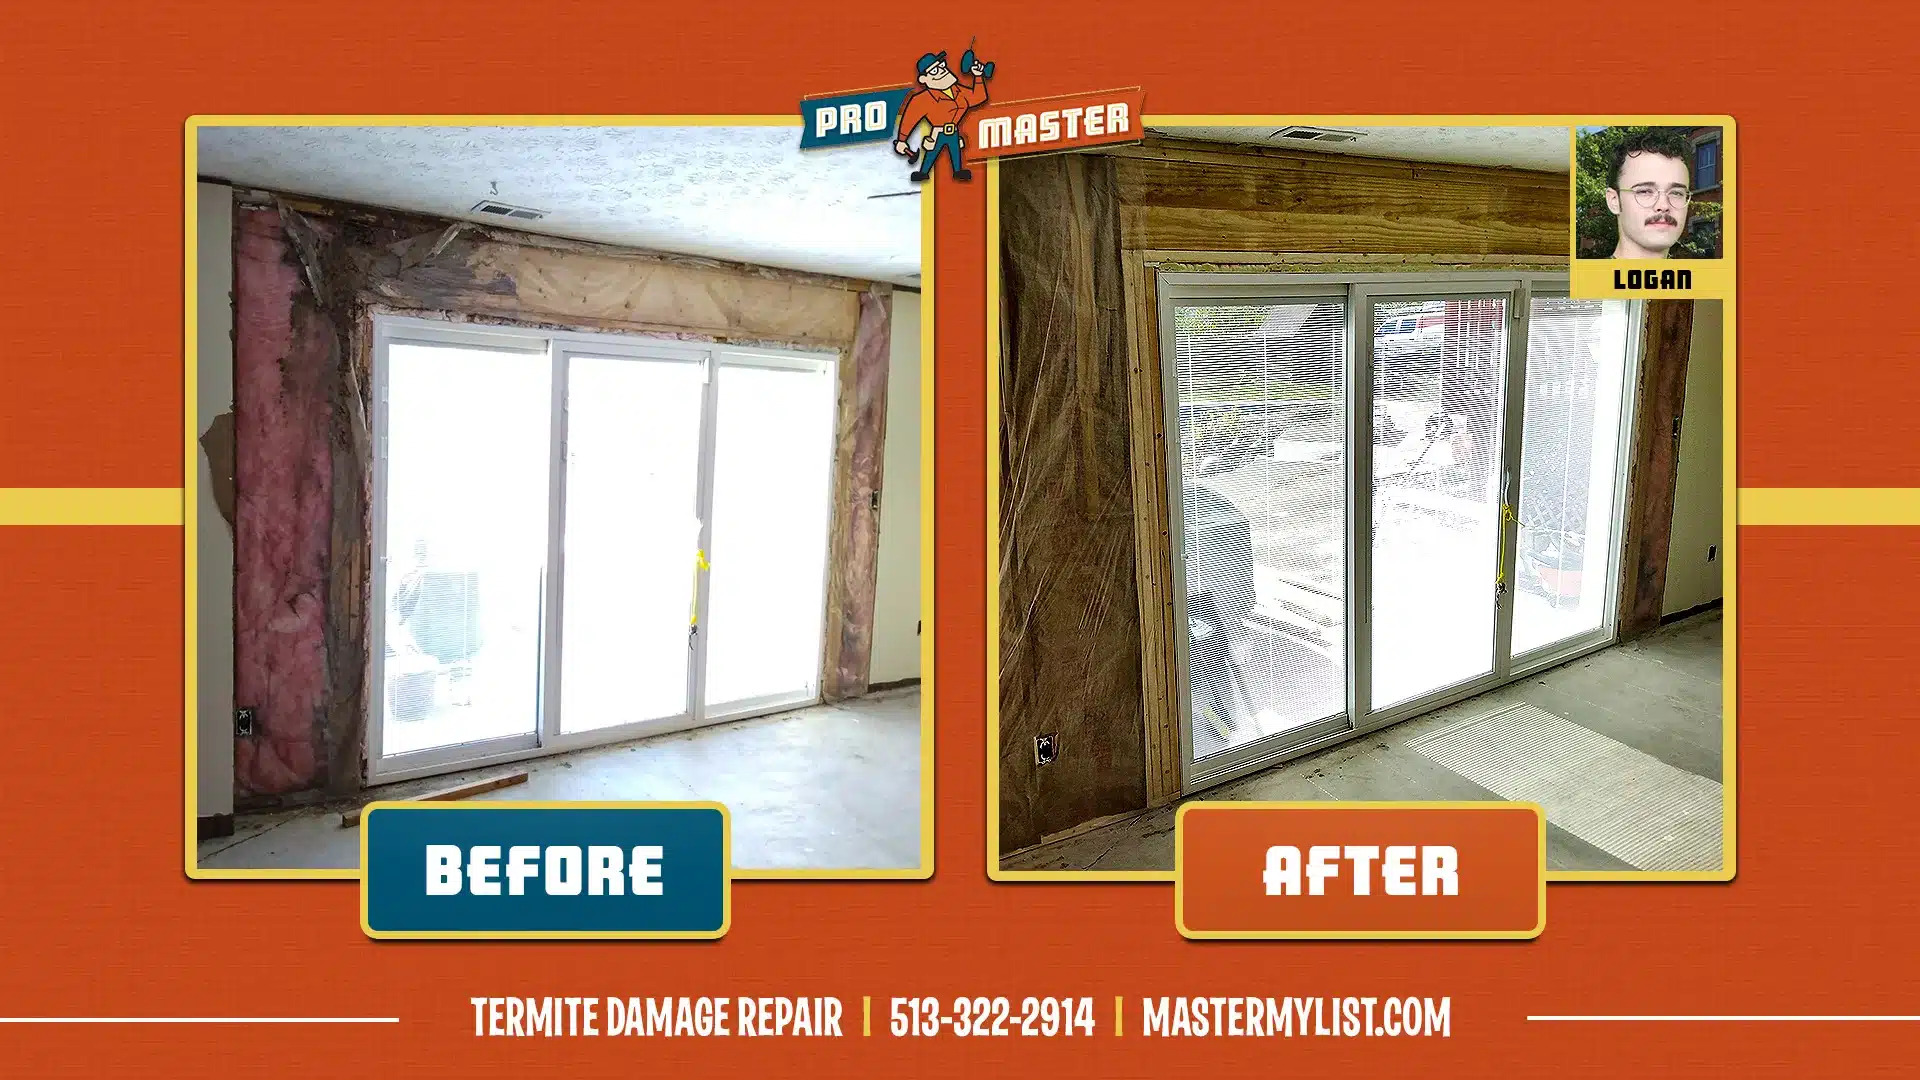 Before and After comparison of structural and terimate damage repair in Cincinnati, OH.